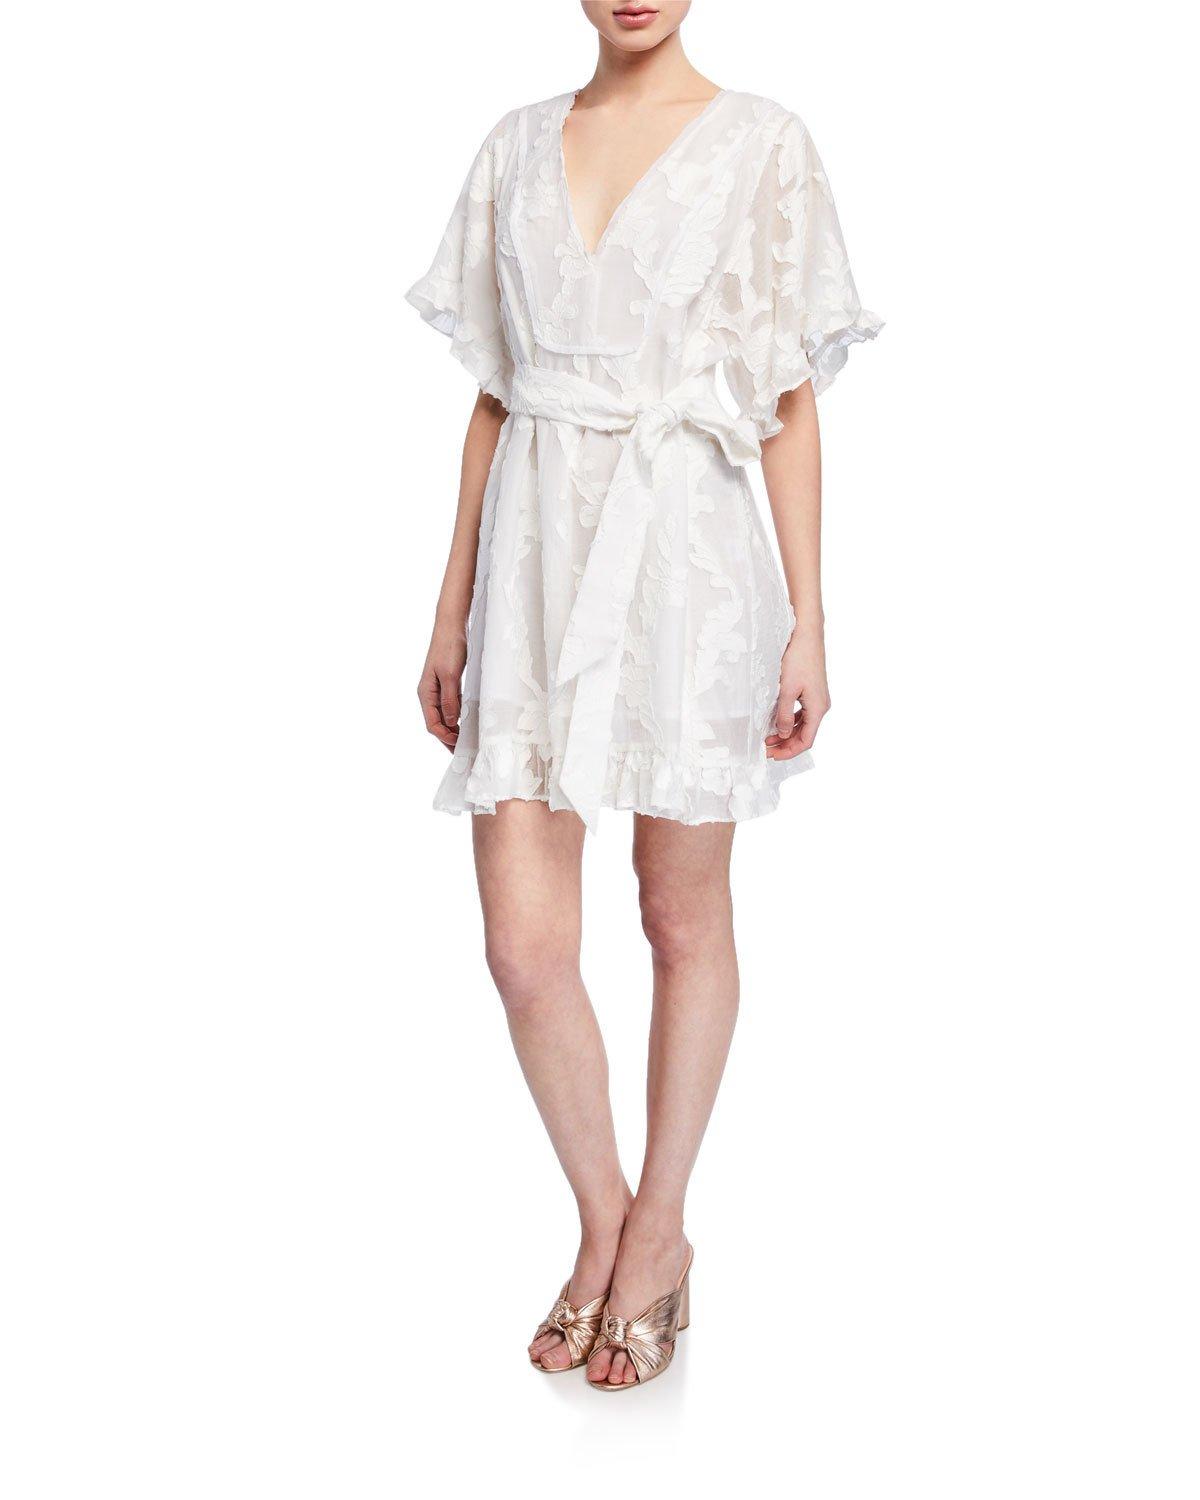 Tanya Taylor Gabriela Lace Flutter-sleeve Dress in White - Lyst